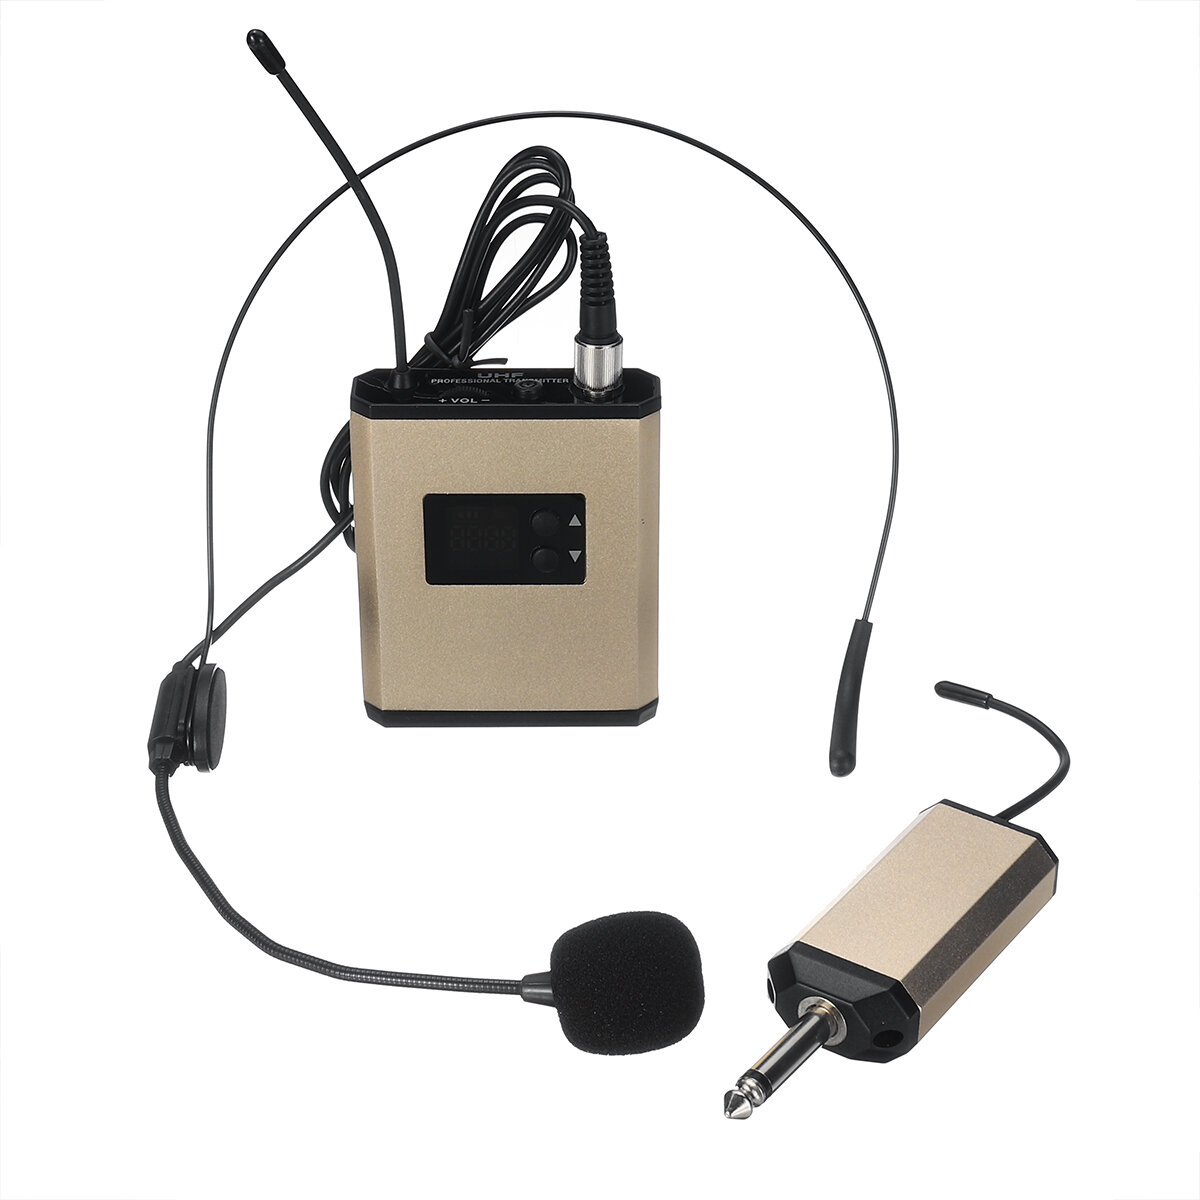 uhf 40 channel wireless microphone headset mic for